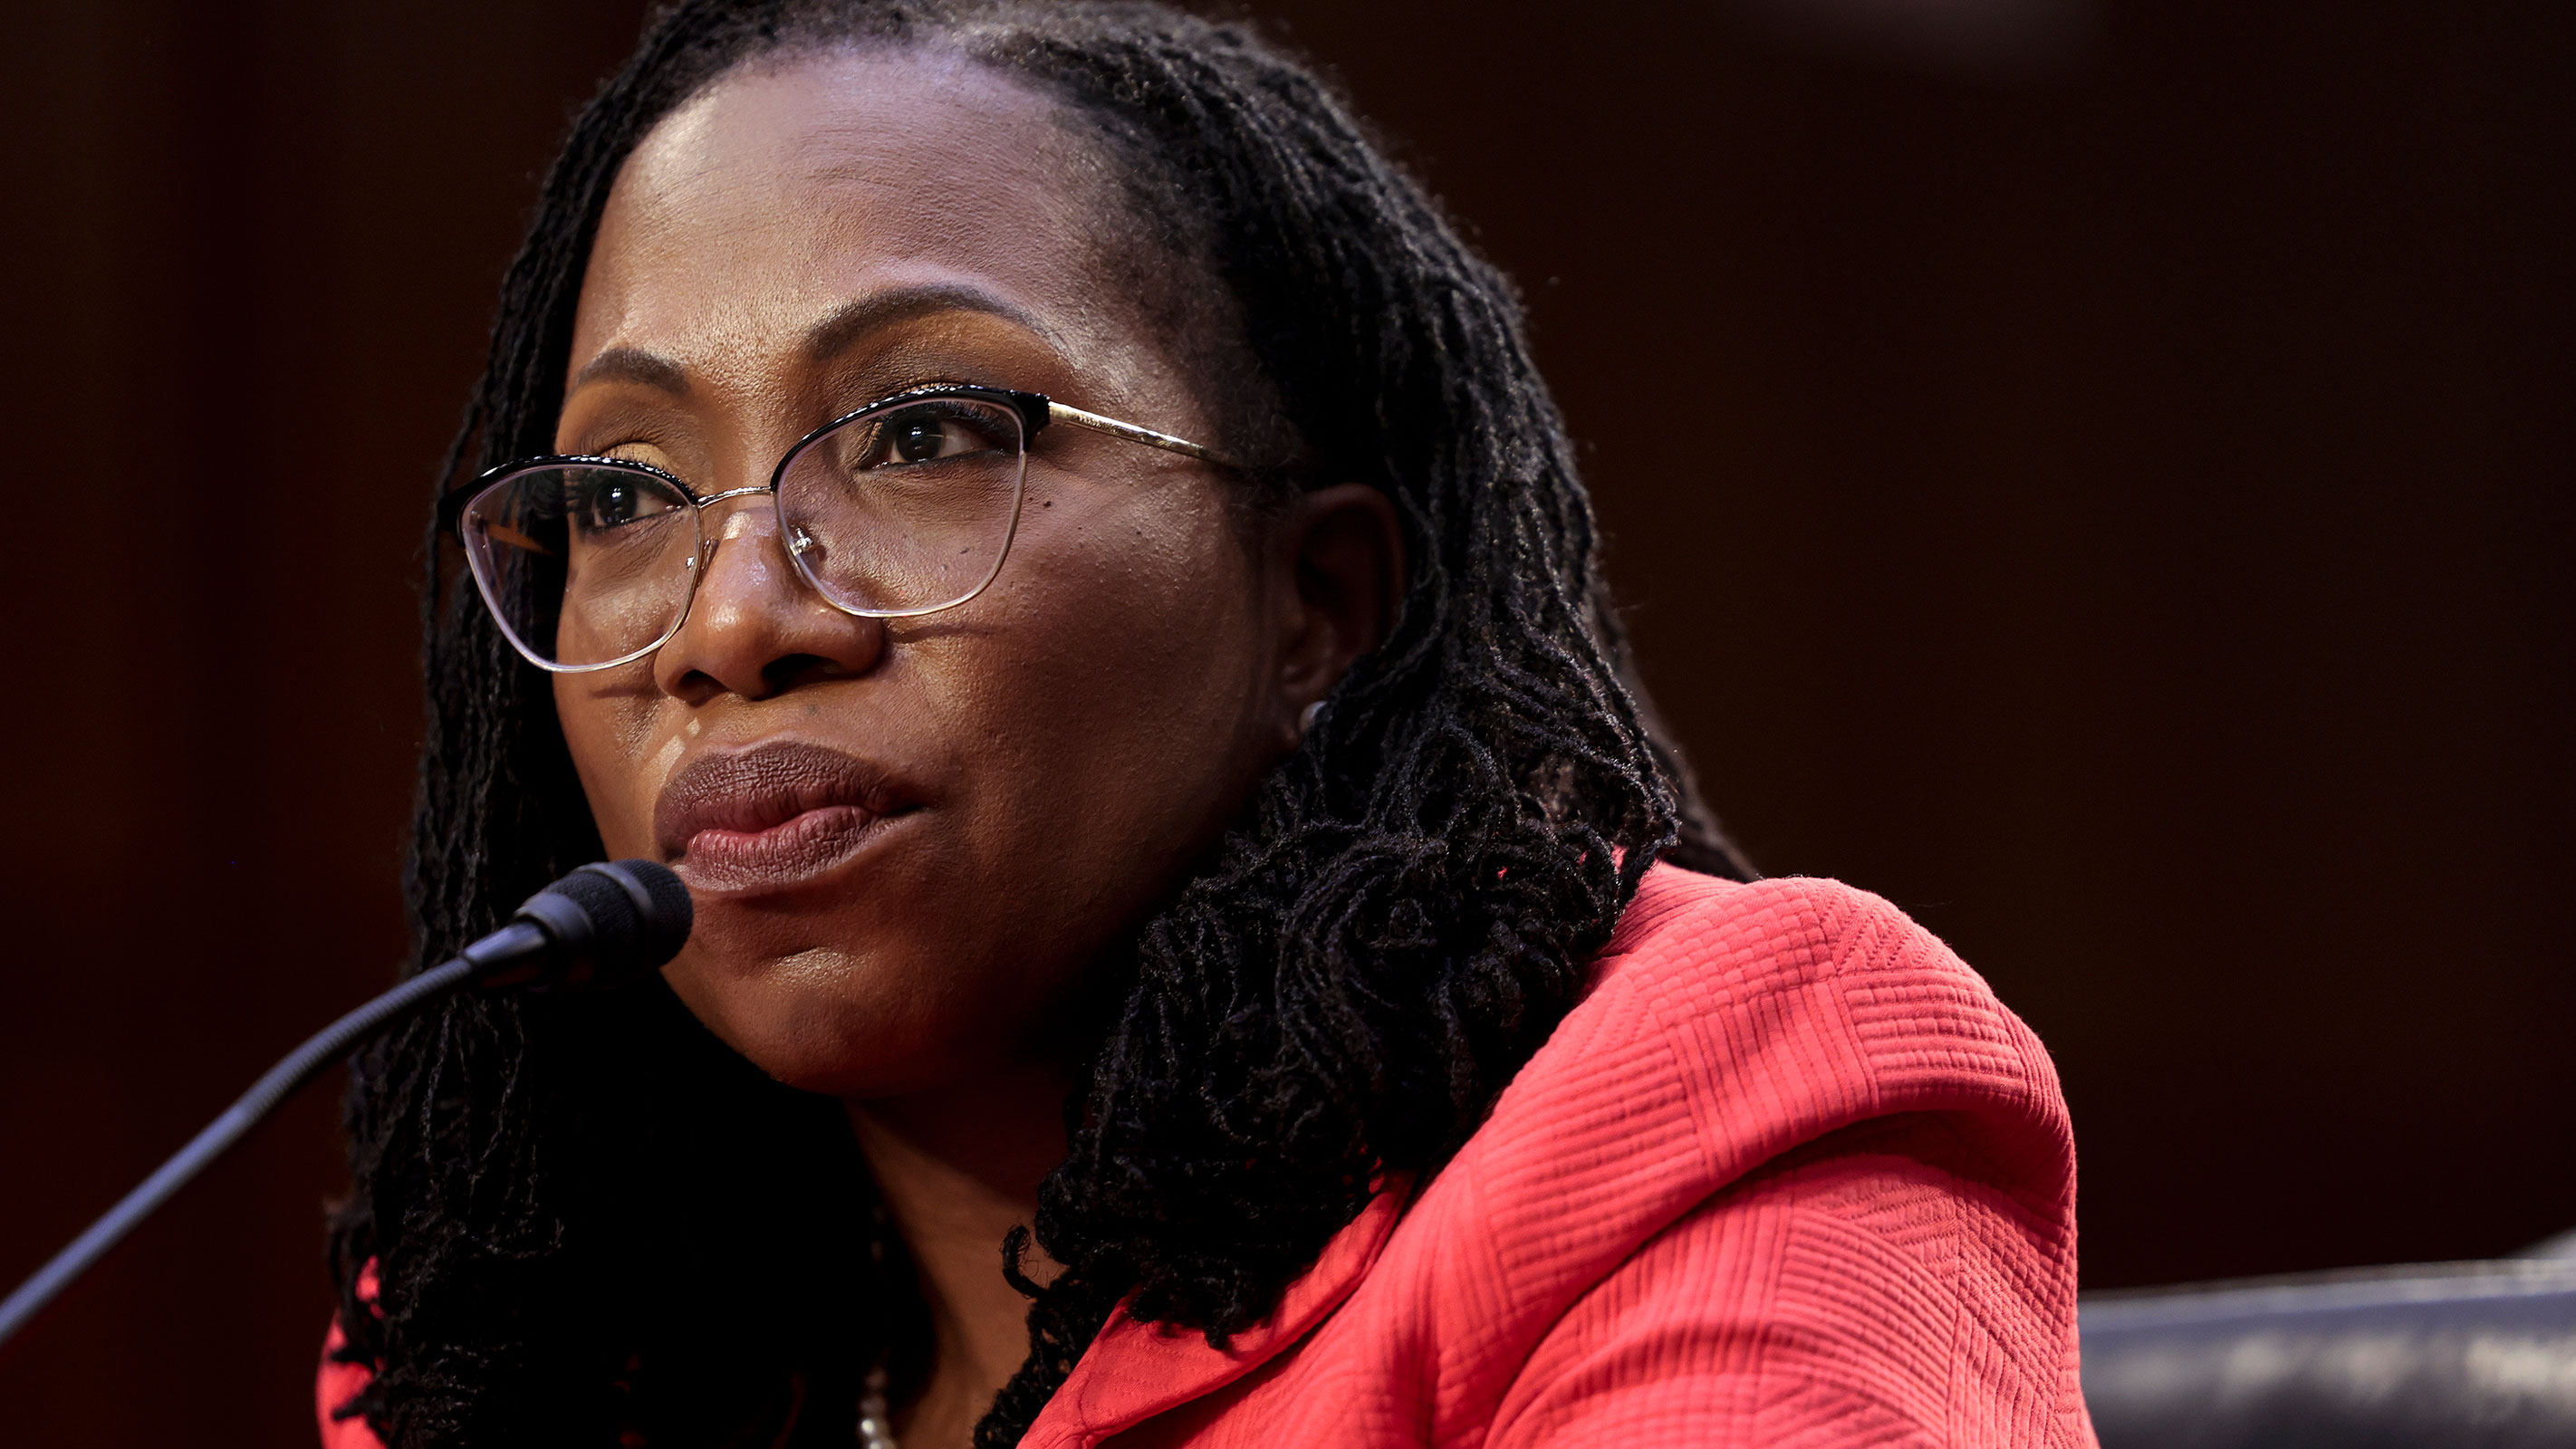 Then-Supreme Court nominee Judge Ketanji Brown Jackson testifies during her confirmation hearing before the Senate Judiciary Committee in the Hart Senate Office Building on Capitol Hill, March 22, 2022 in Washington, DC. 